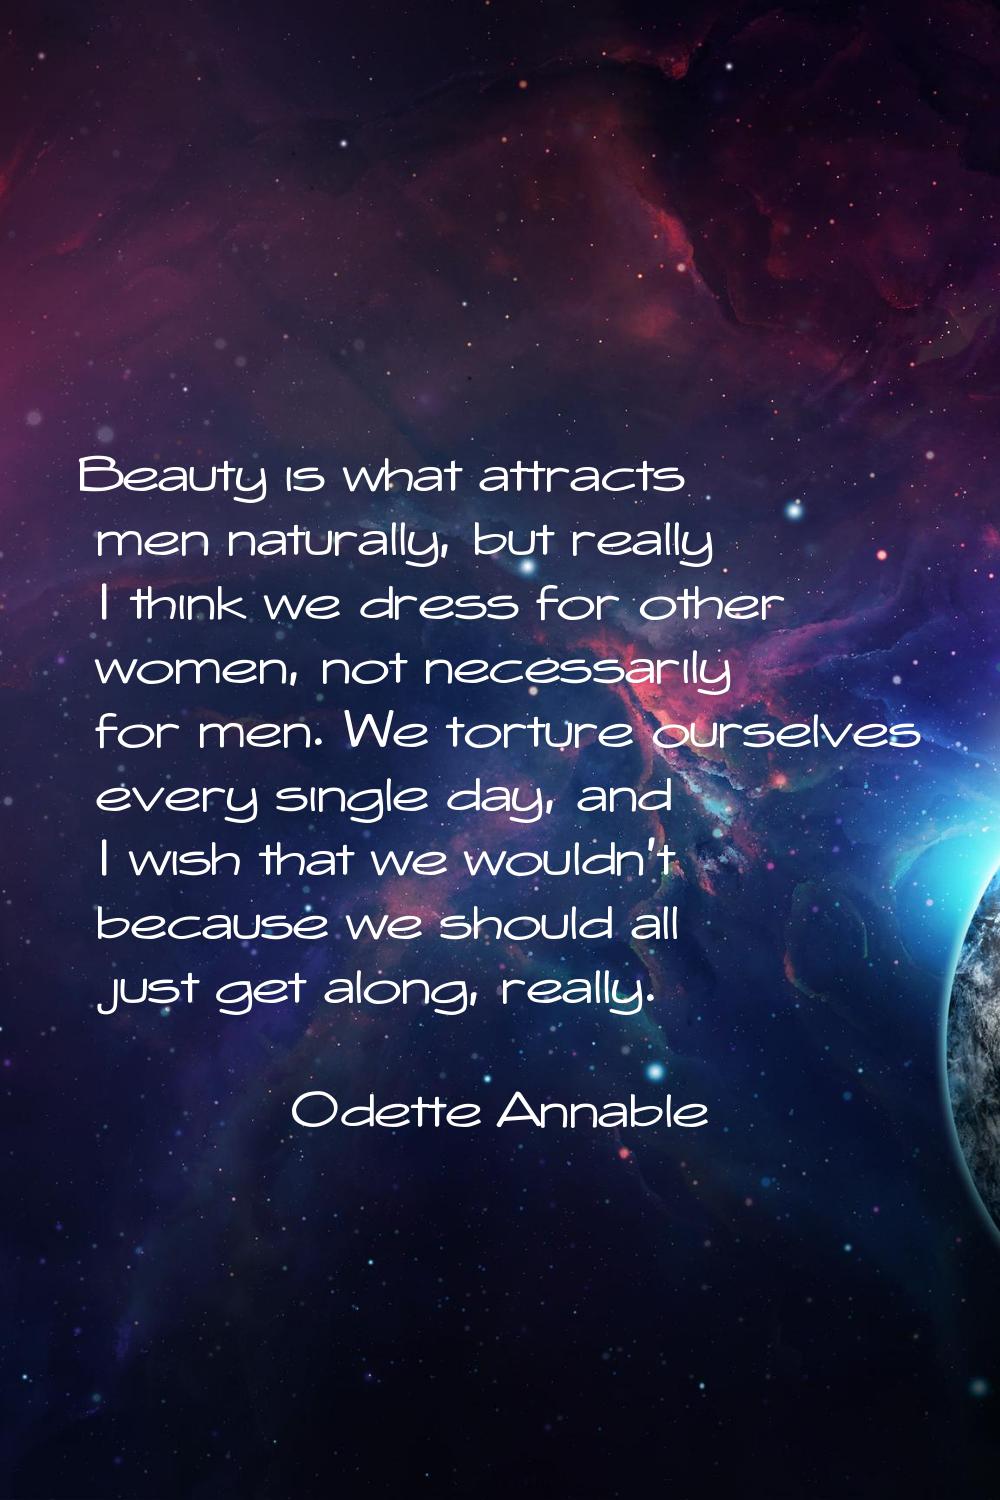 Beauty is what attracts men naturally, but really I think we dress for other women, not necessarily